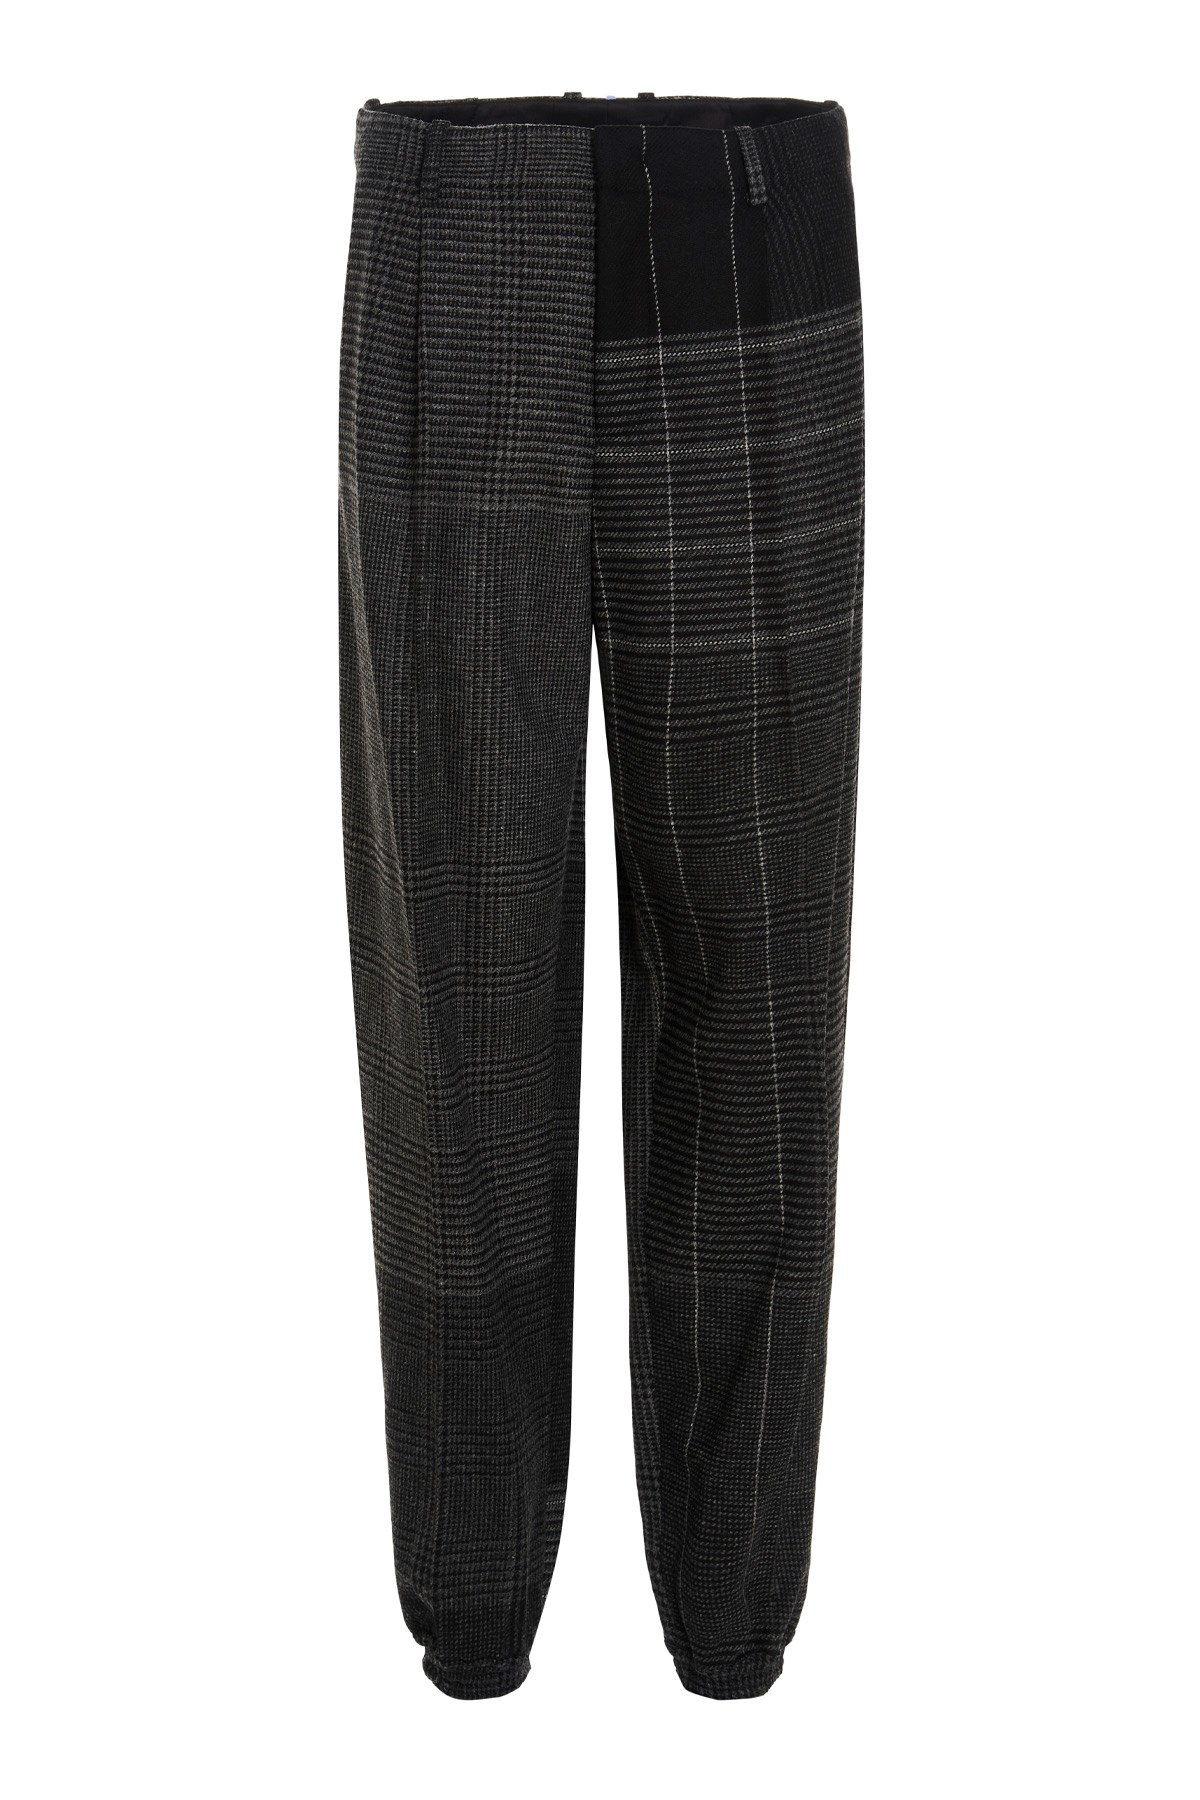 MCQ In Dust Capsule 'Cuffed Heritage’ Trousers